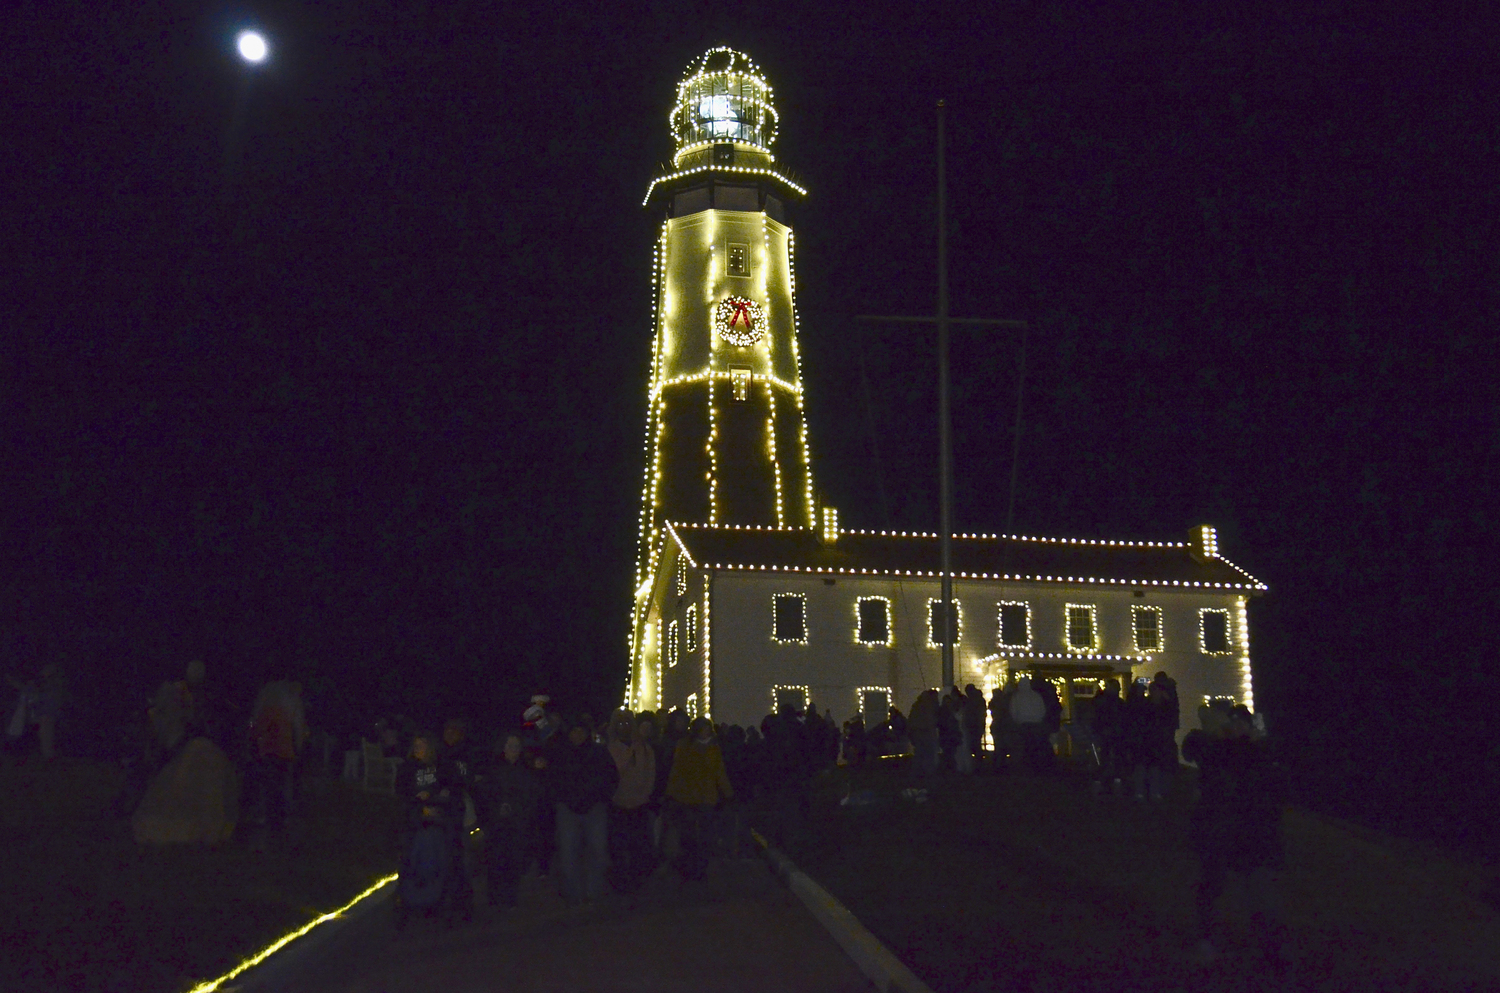 The Montauk Point Lighthouse lighted for the season.